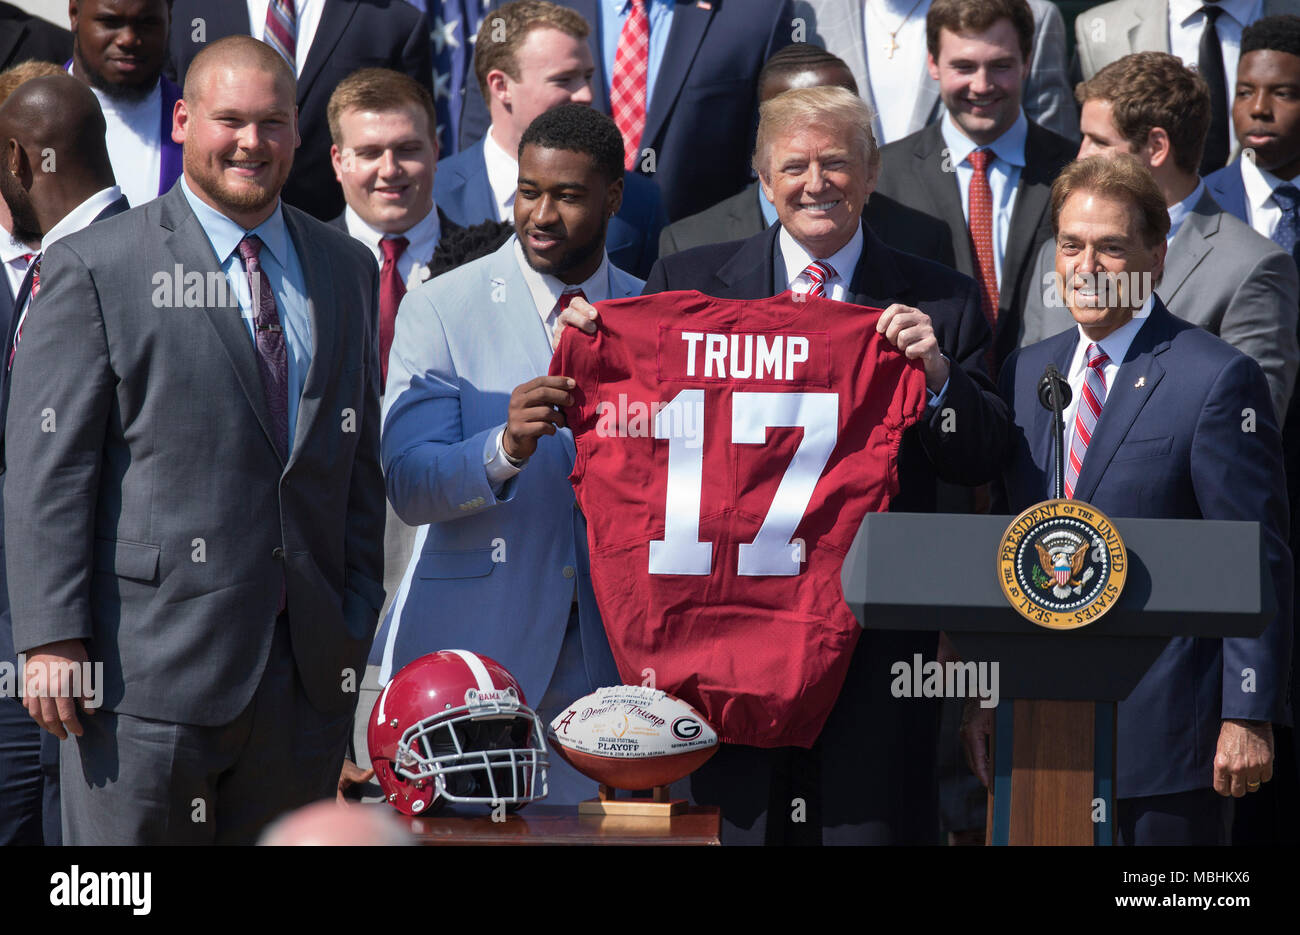 Washington, USA. 10th Apr, 2018. United States President Donald J. Trump  receives a jersey from team members during the welcoming ceremony of the  2017 NCAA Football National Champions: The Alabama Crimson Tide